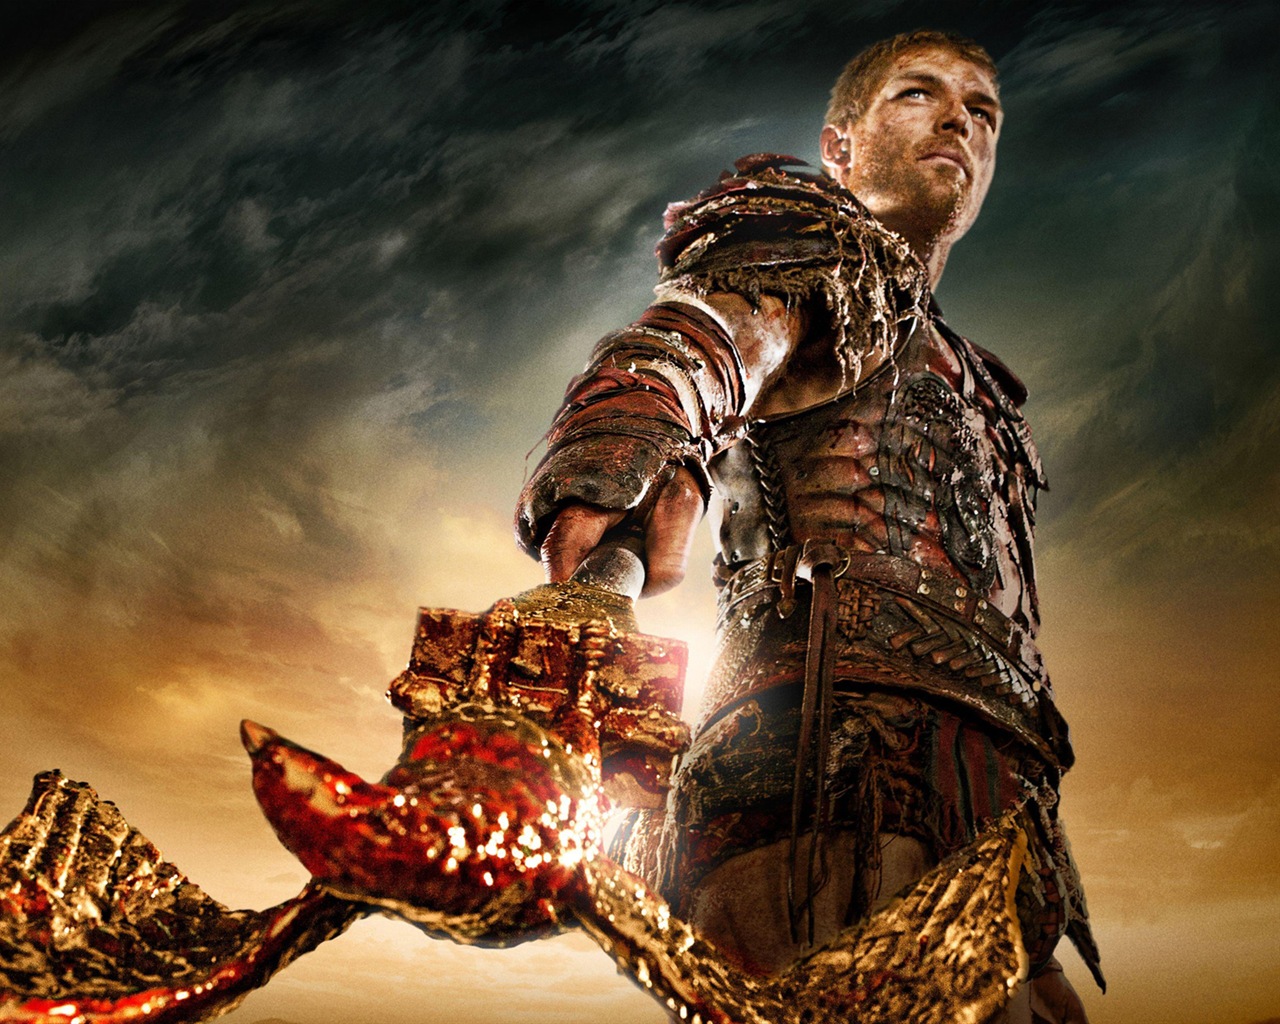 Spartacus: War of the Damned HD wallpapers #19 - 1280x1024